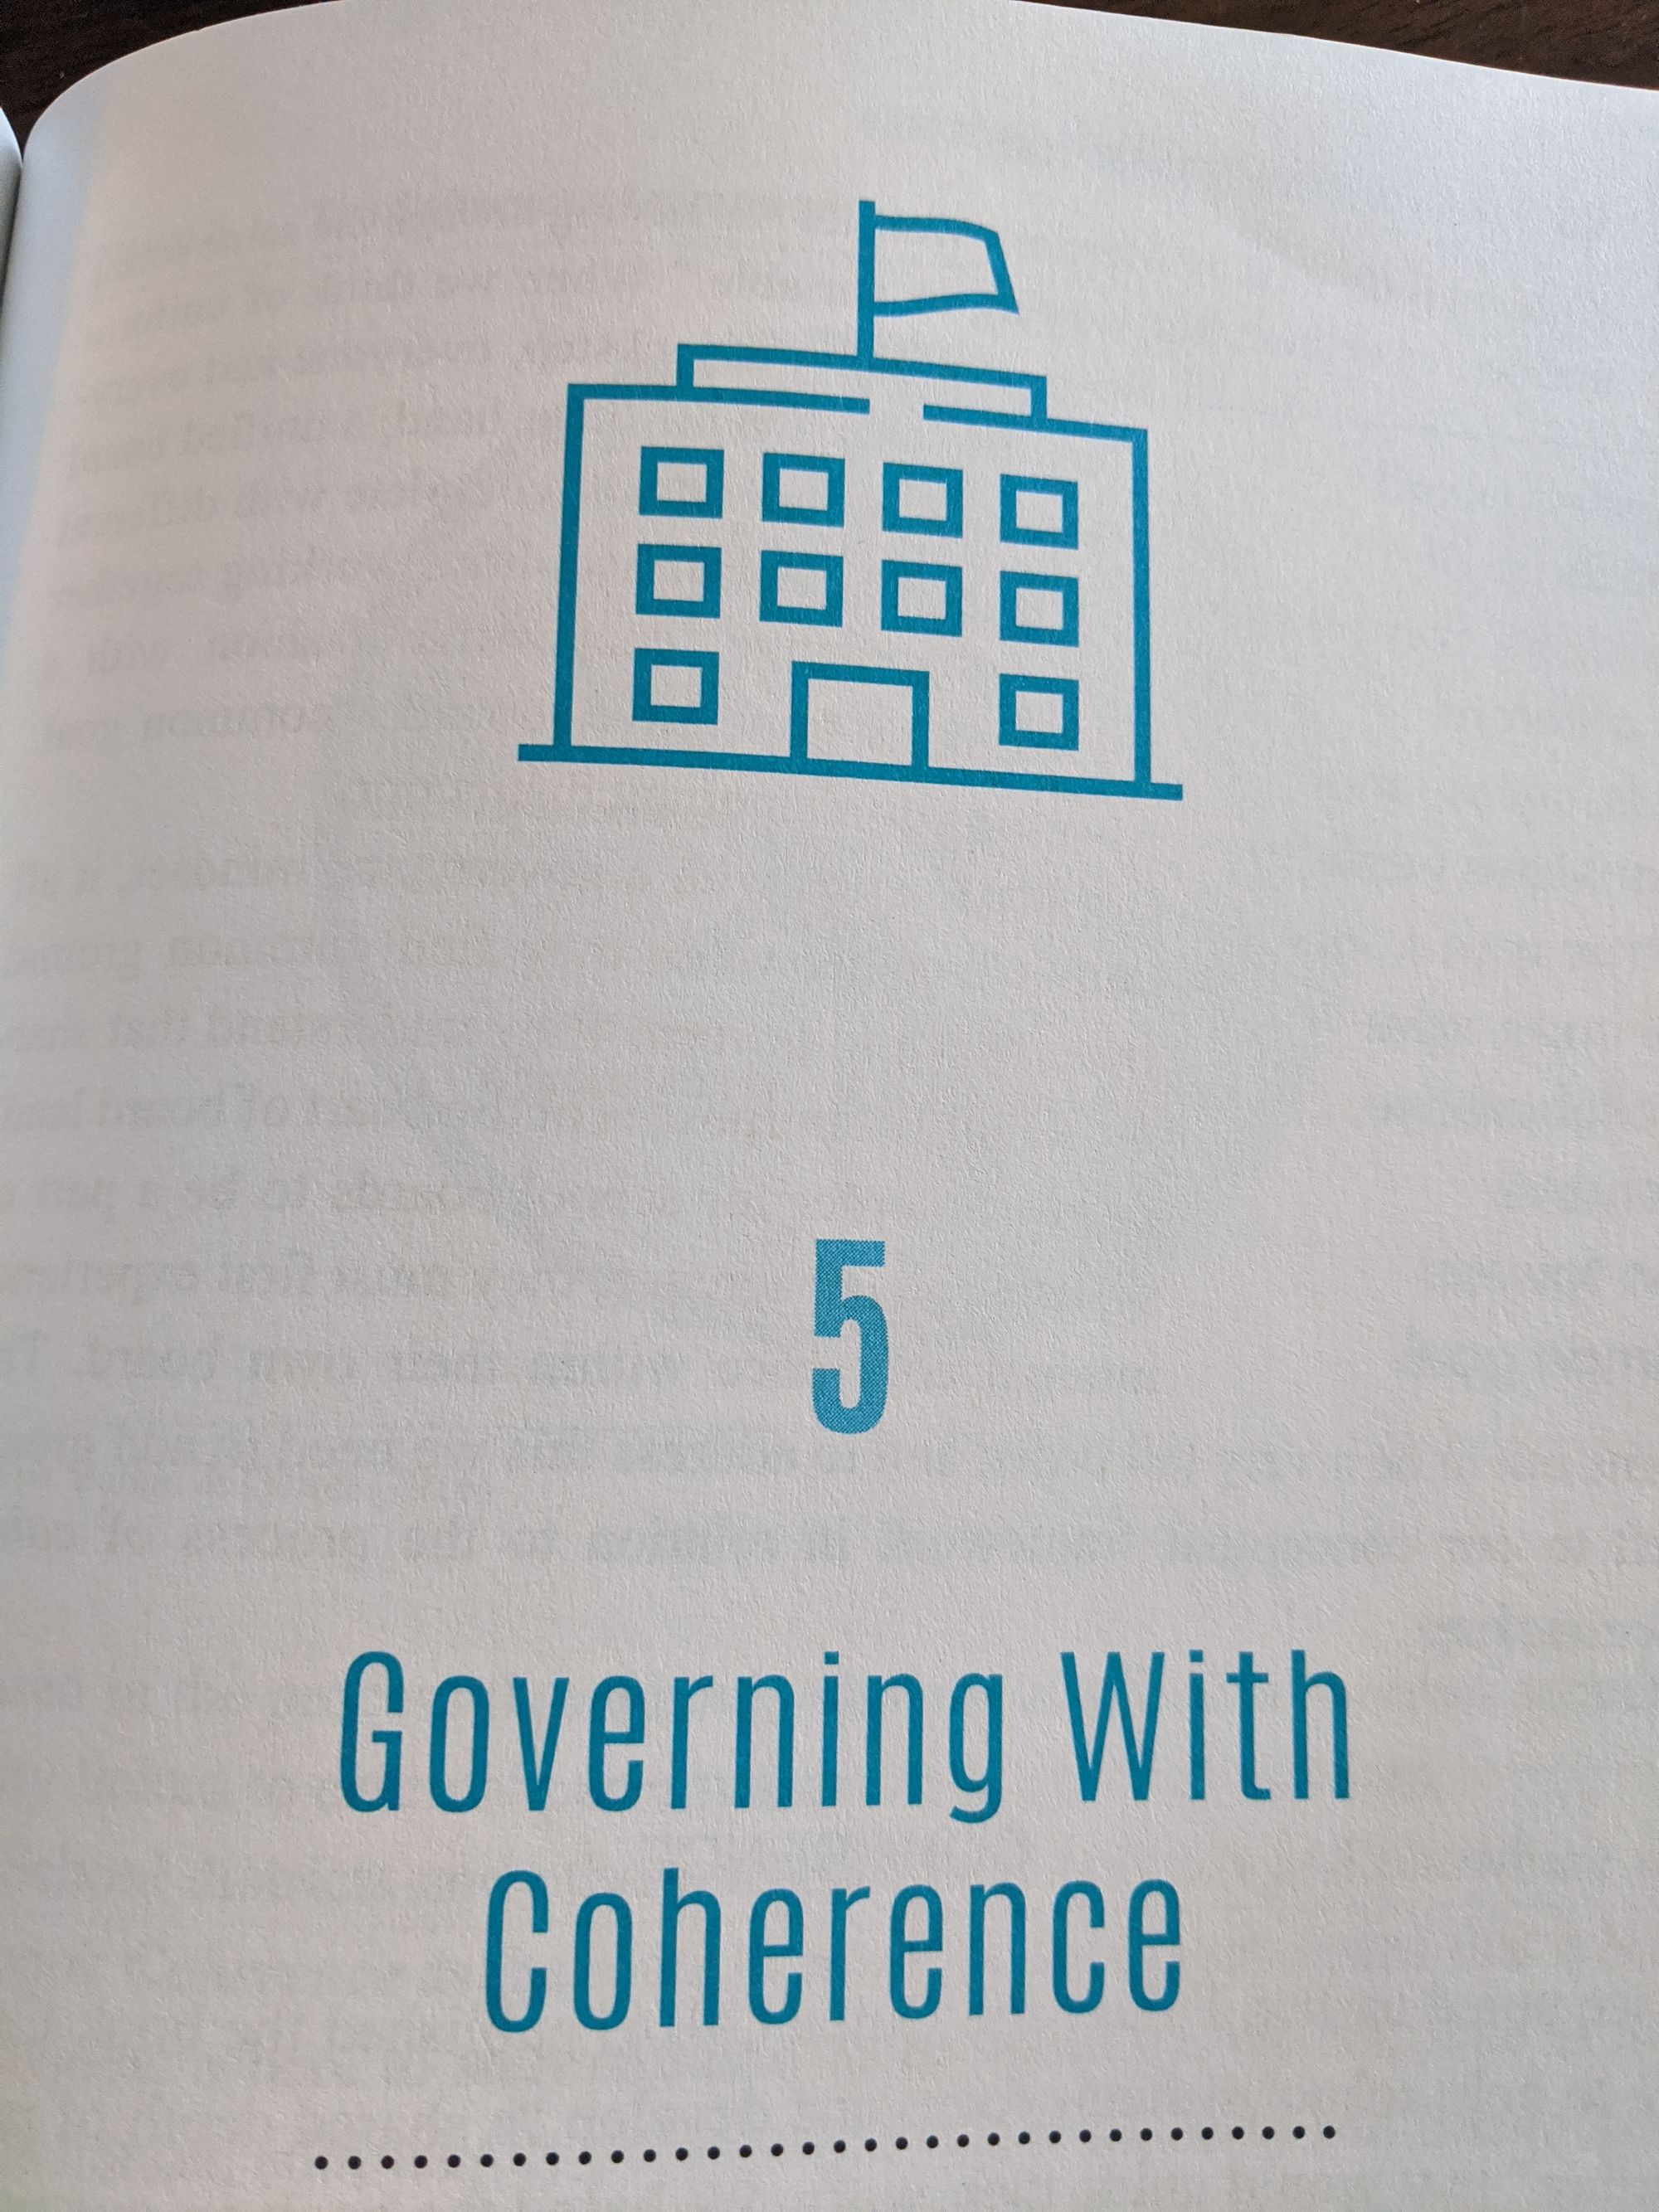 Let’s Read: The Governance Core, Ch.  5